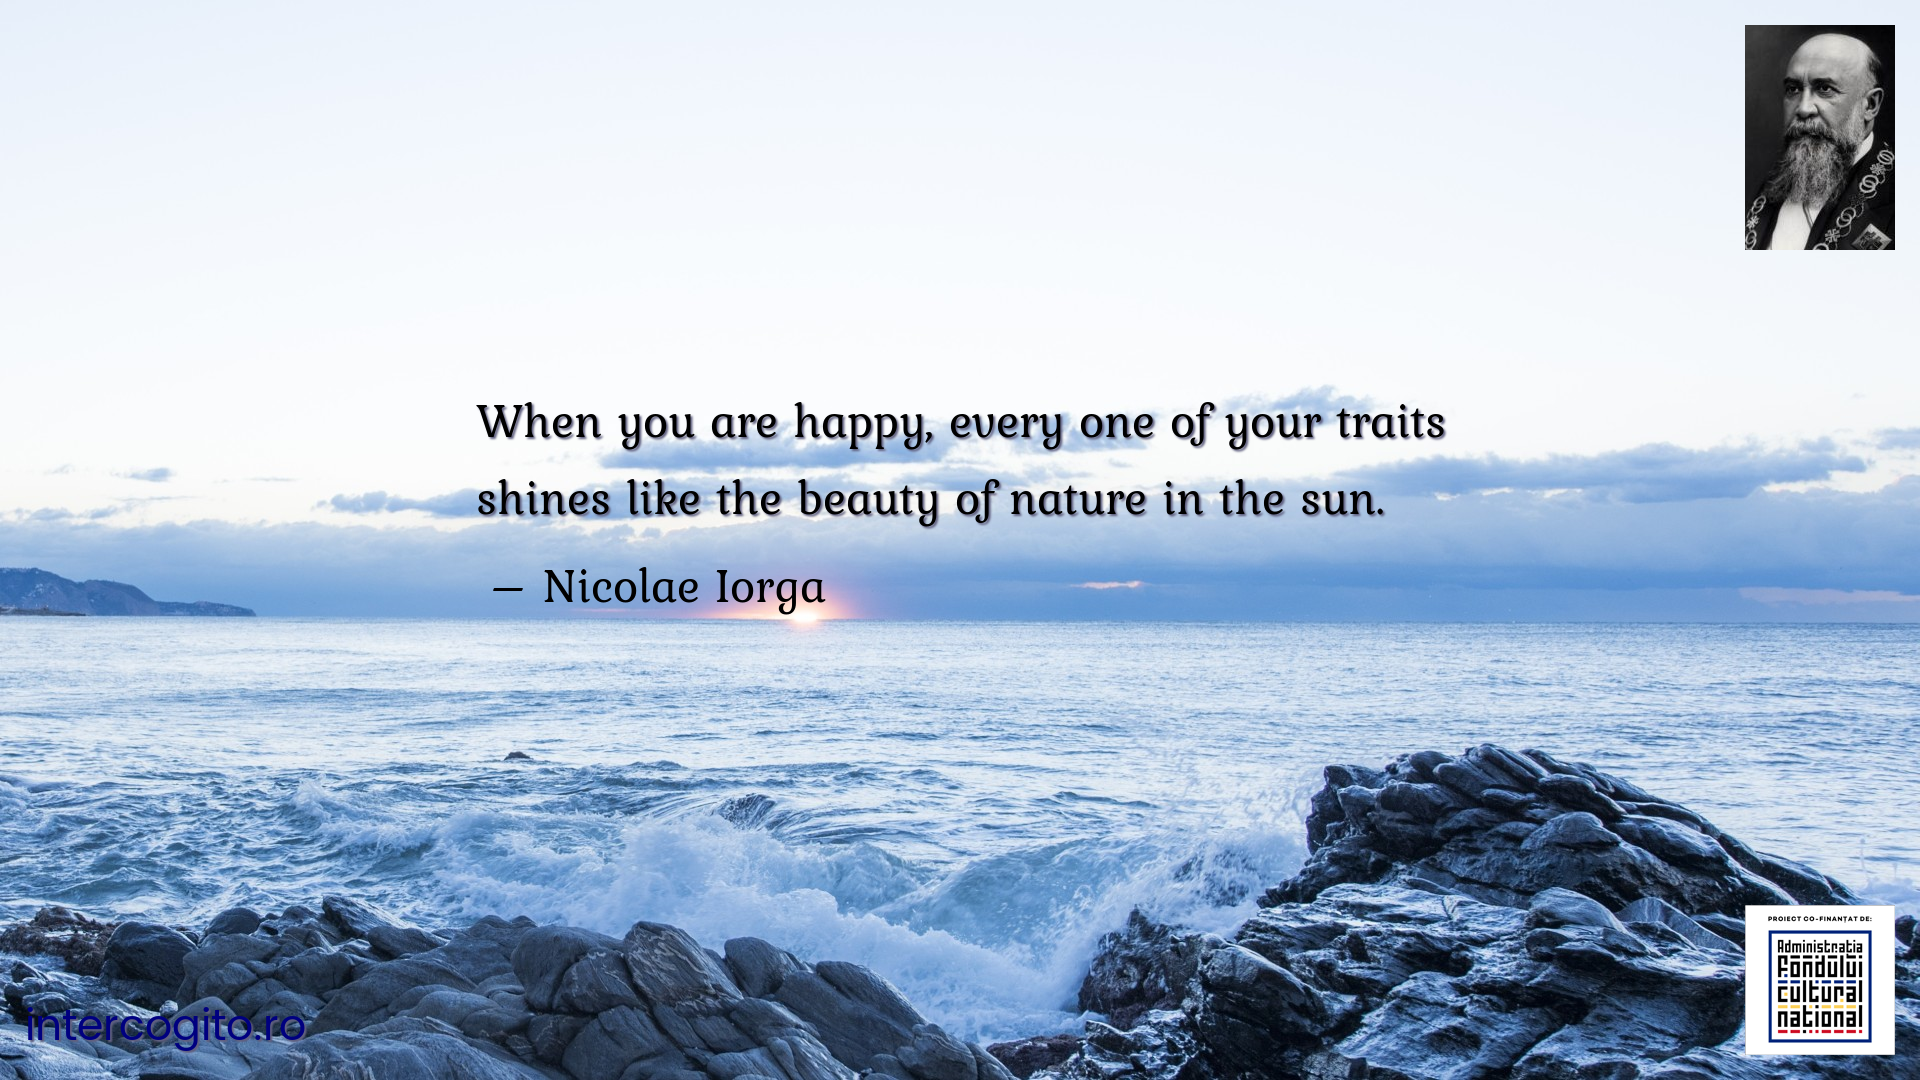 When you are happy, every one of your traits shines like the beauty of nature in the sun.